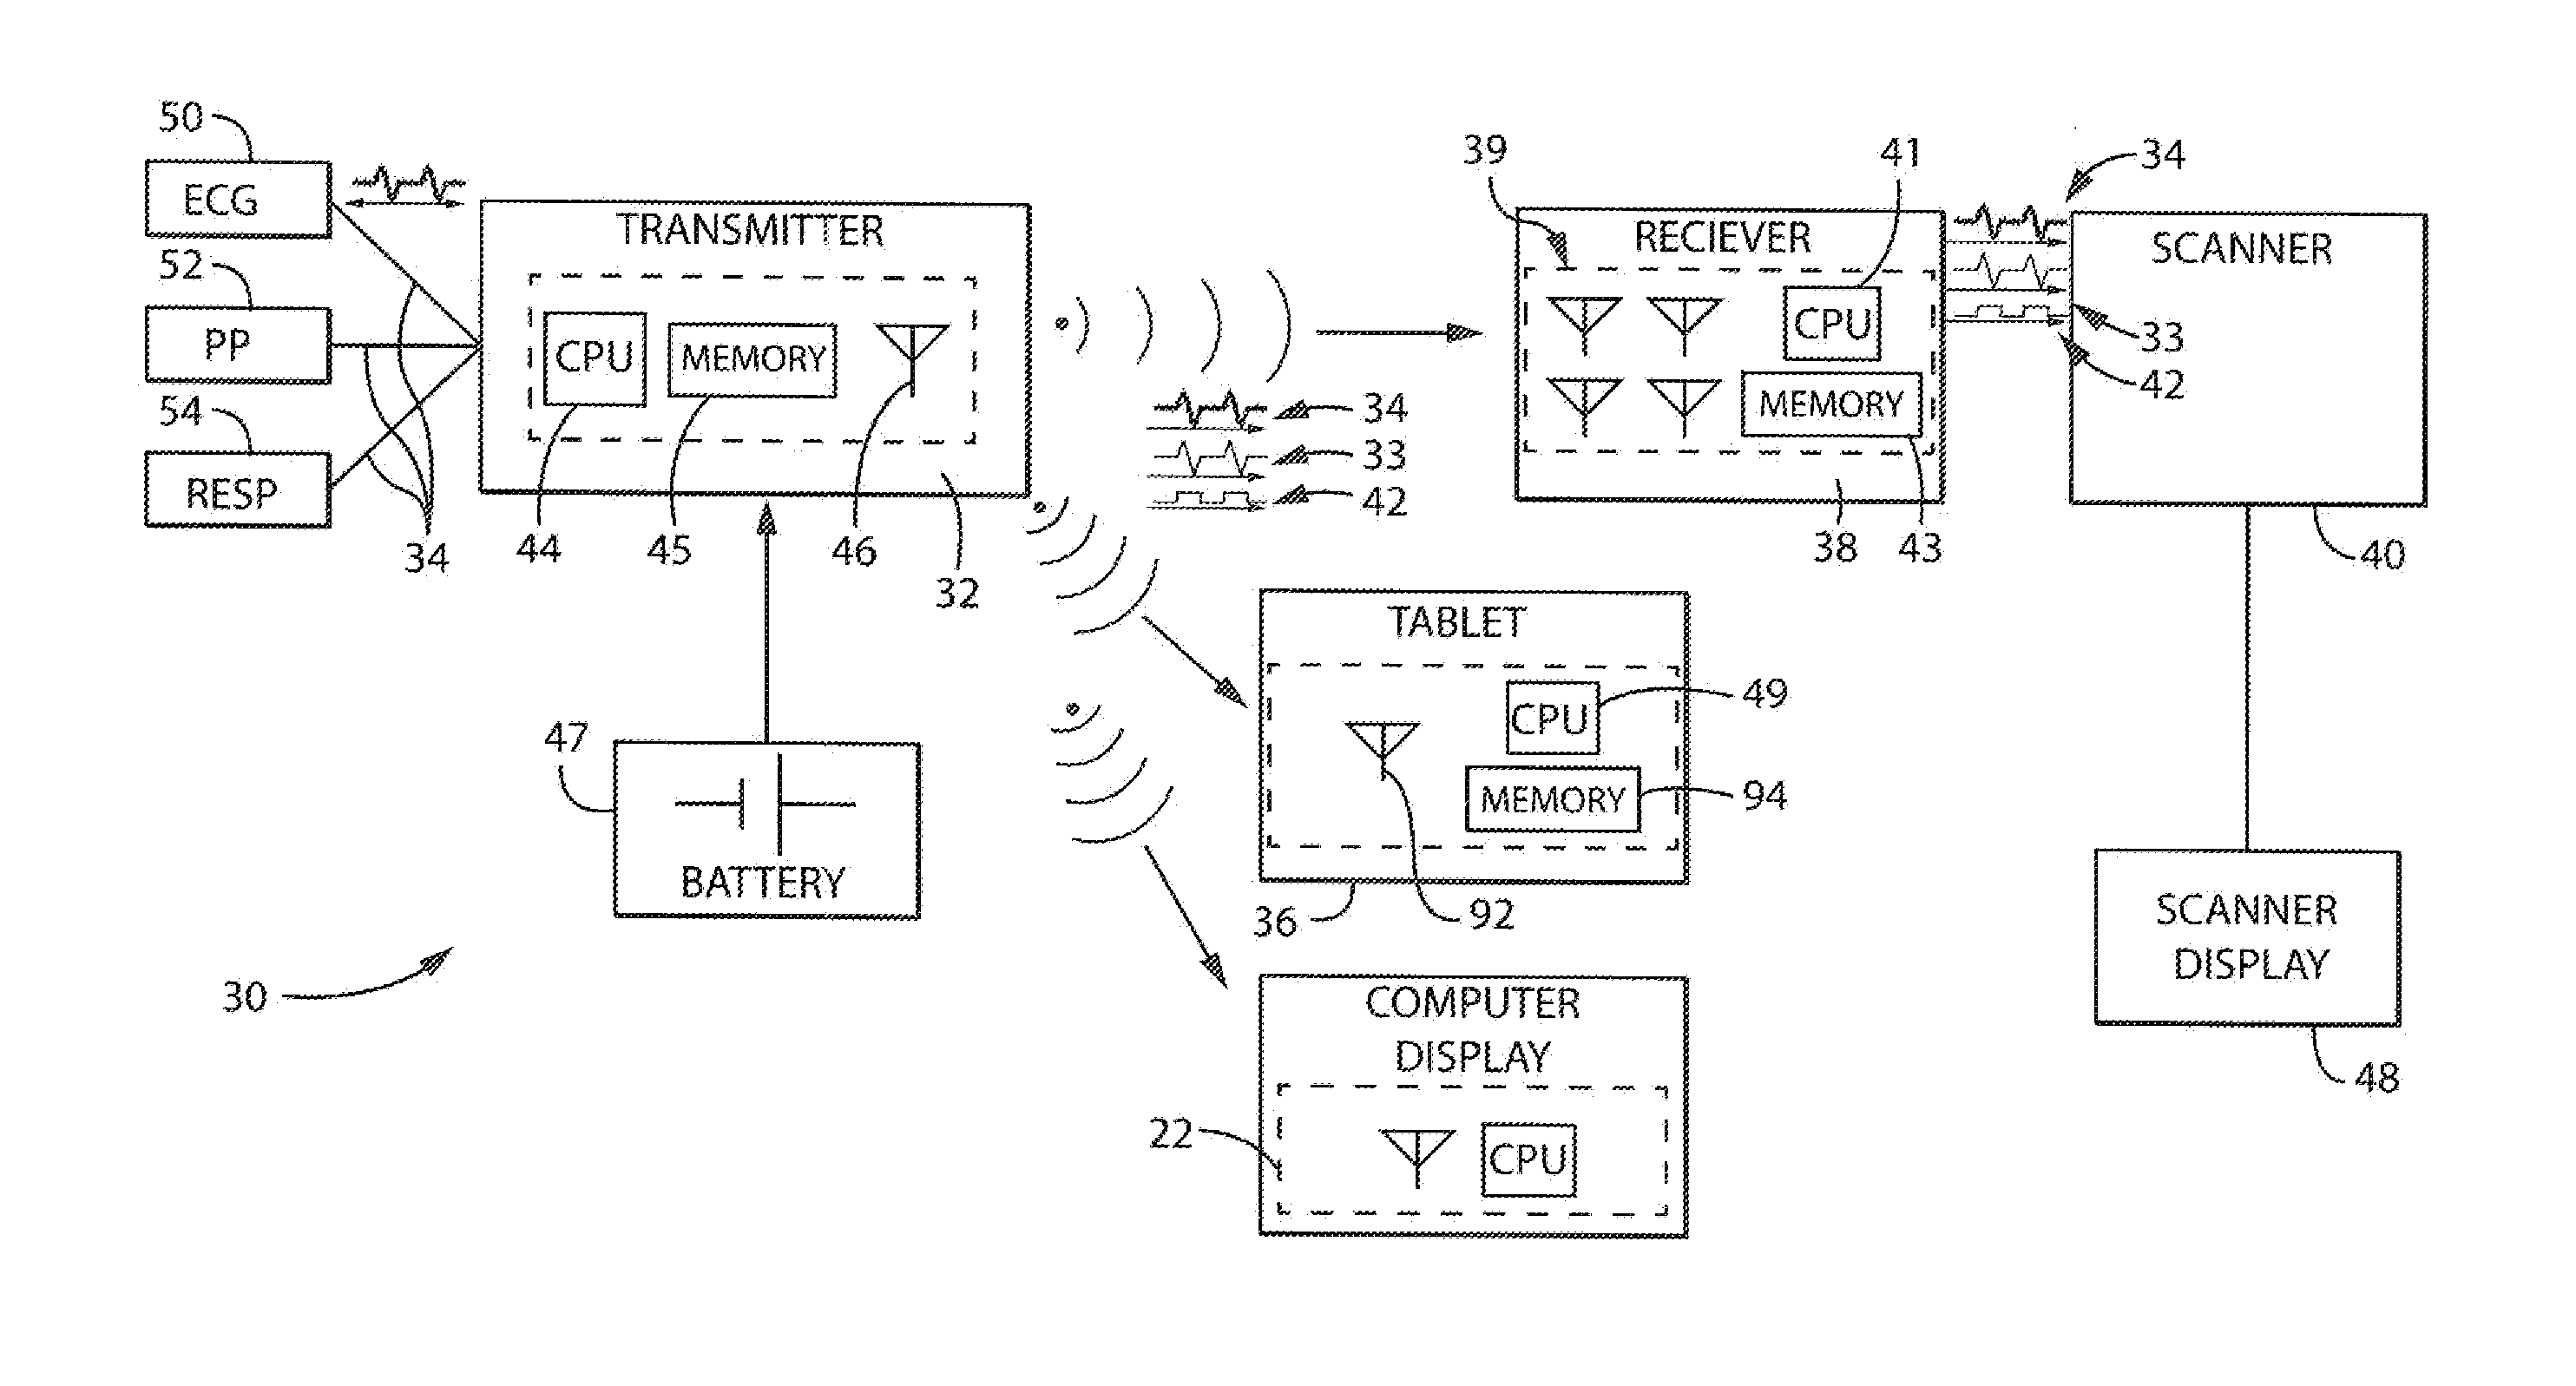 Method and Apparatus for High Reliability Wireless Communications